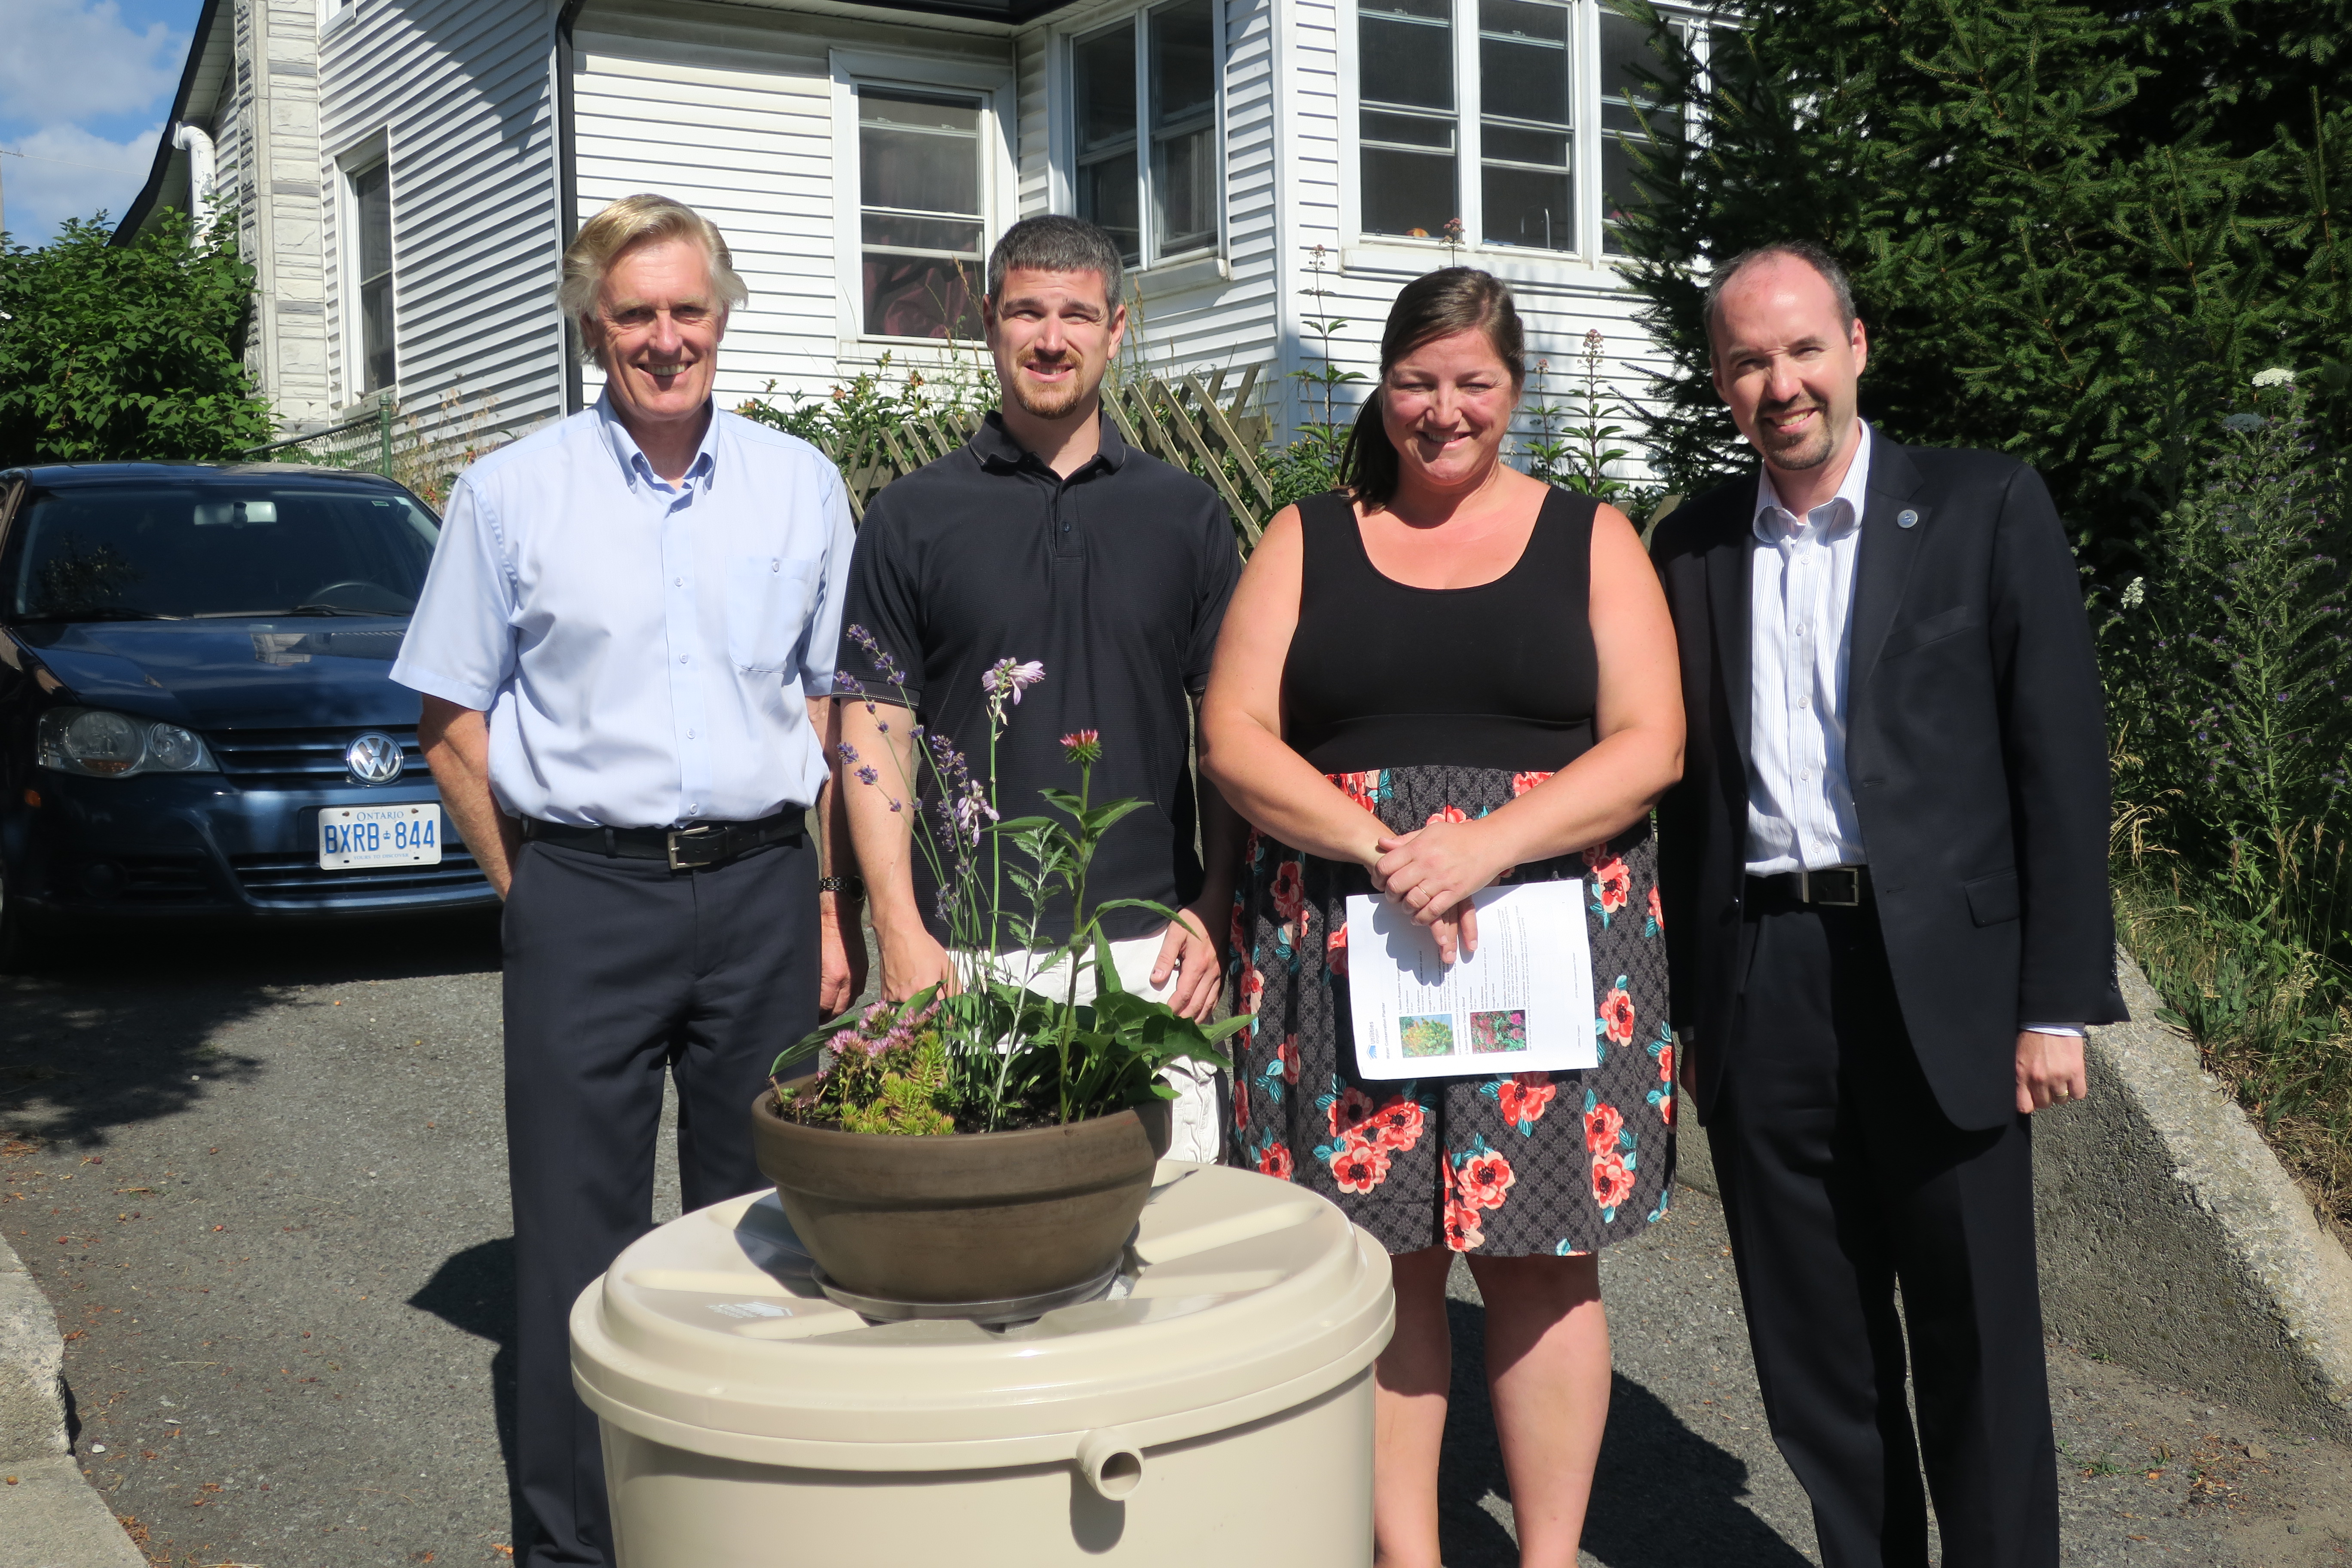 The ten thousandth rain barrel is delivered to our customers